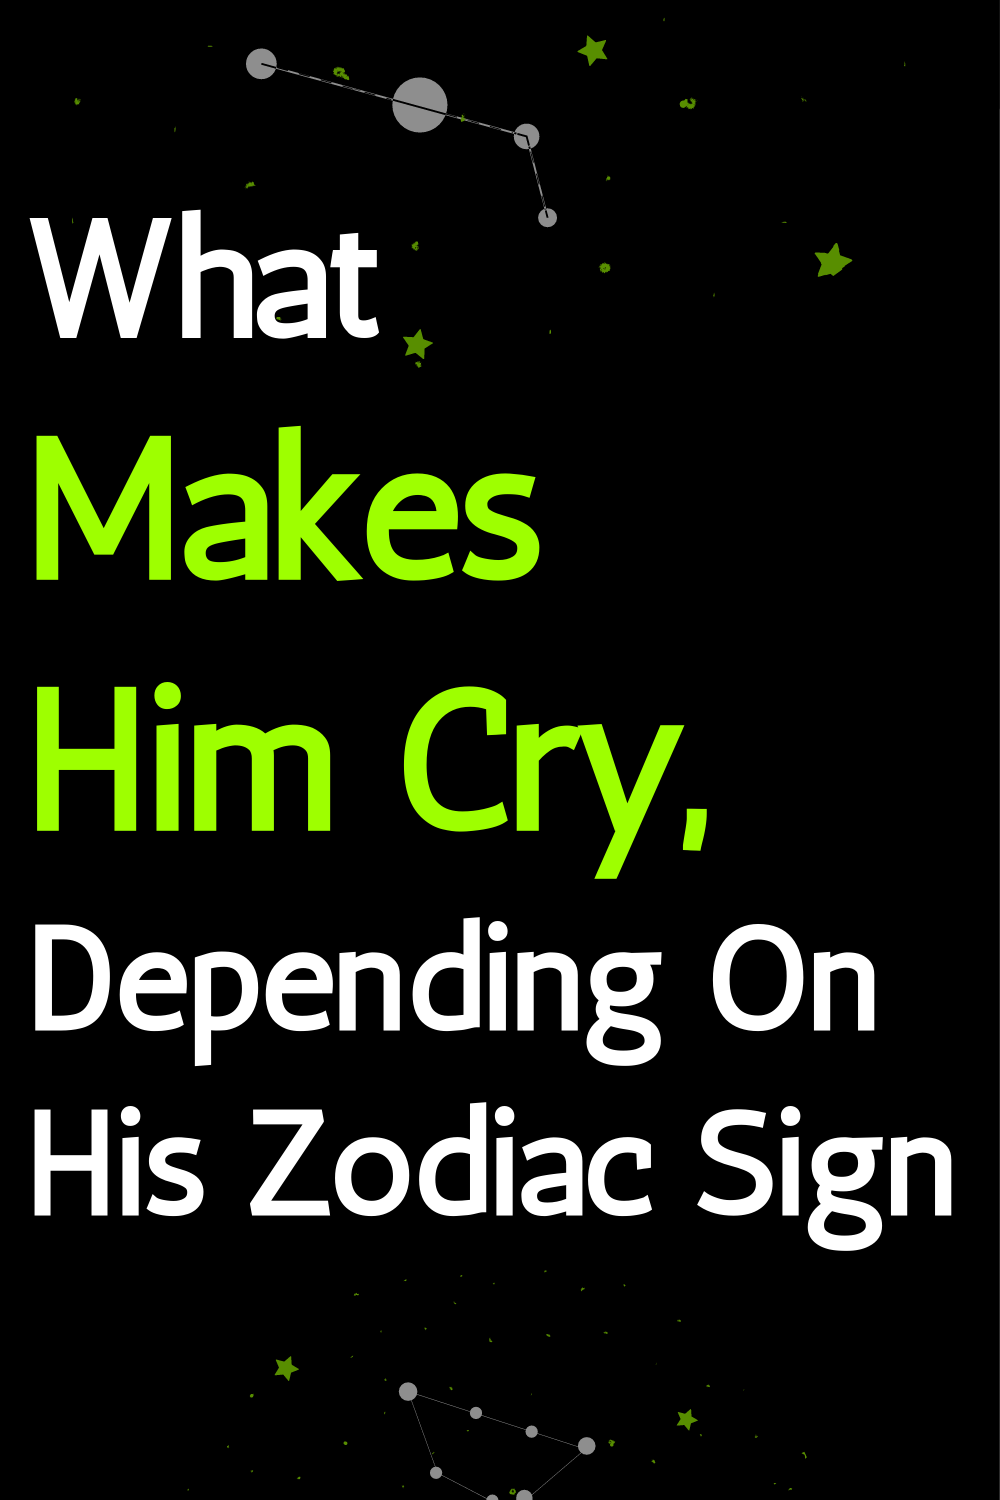 What Makes Him Cry, Depending On His Zodiac Sign